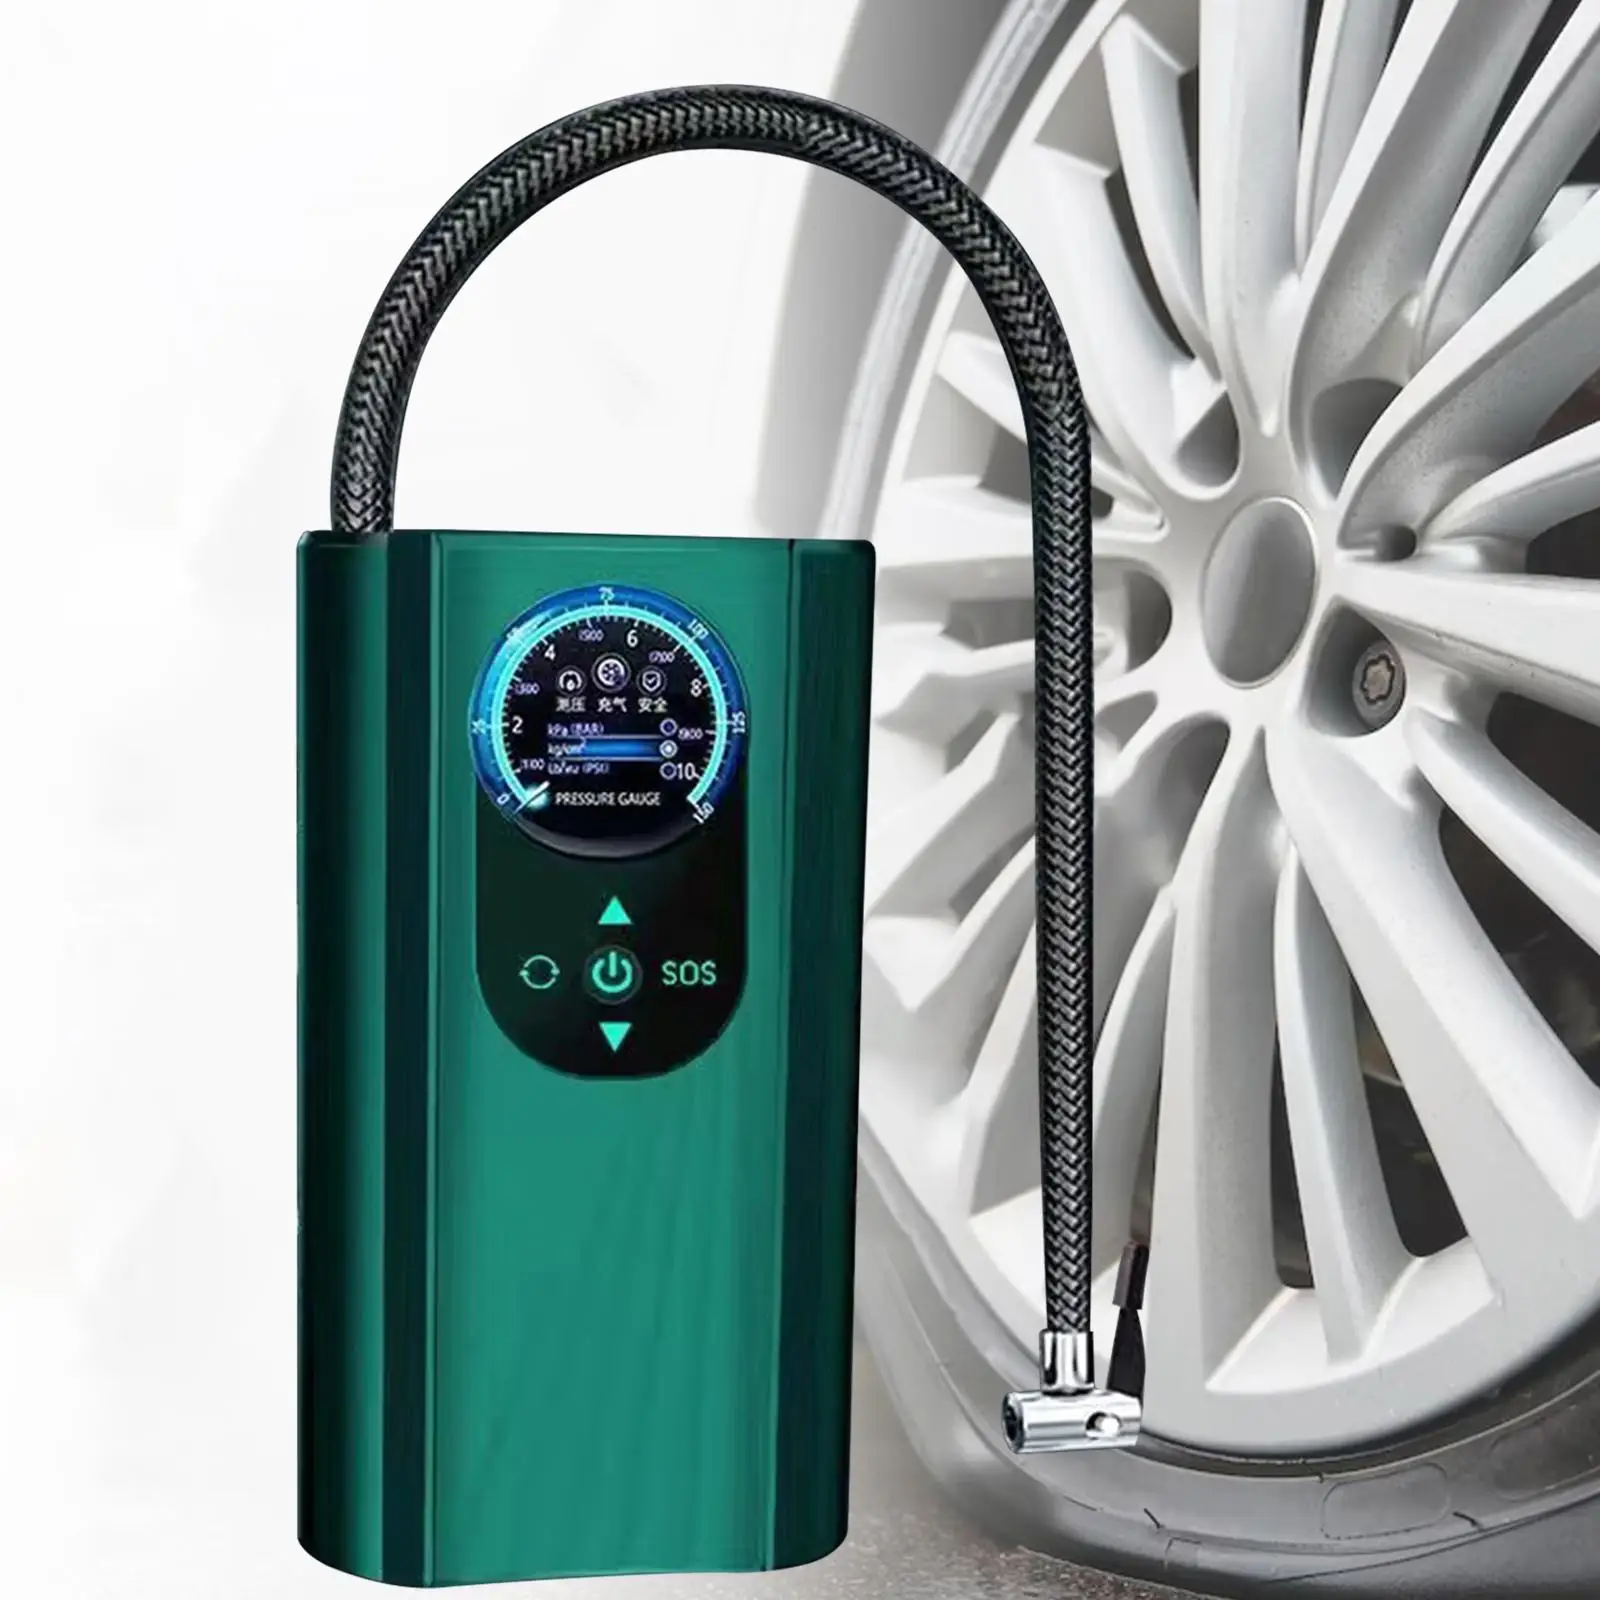 Portable Air Compressor with Pressure Gauge Fast Auto Accessories Mini Handheld Tire Inflator for Bicycle Ball SUV Bike Car